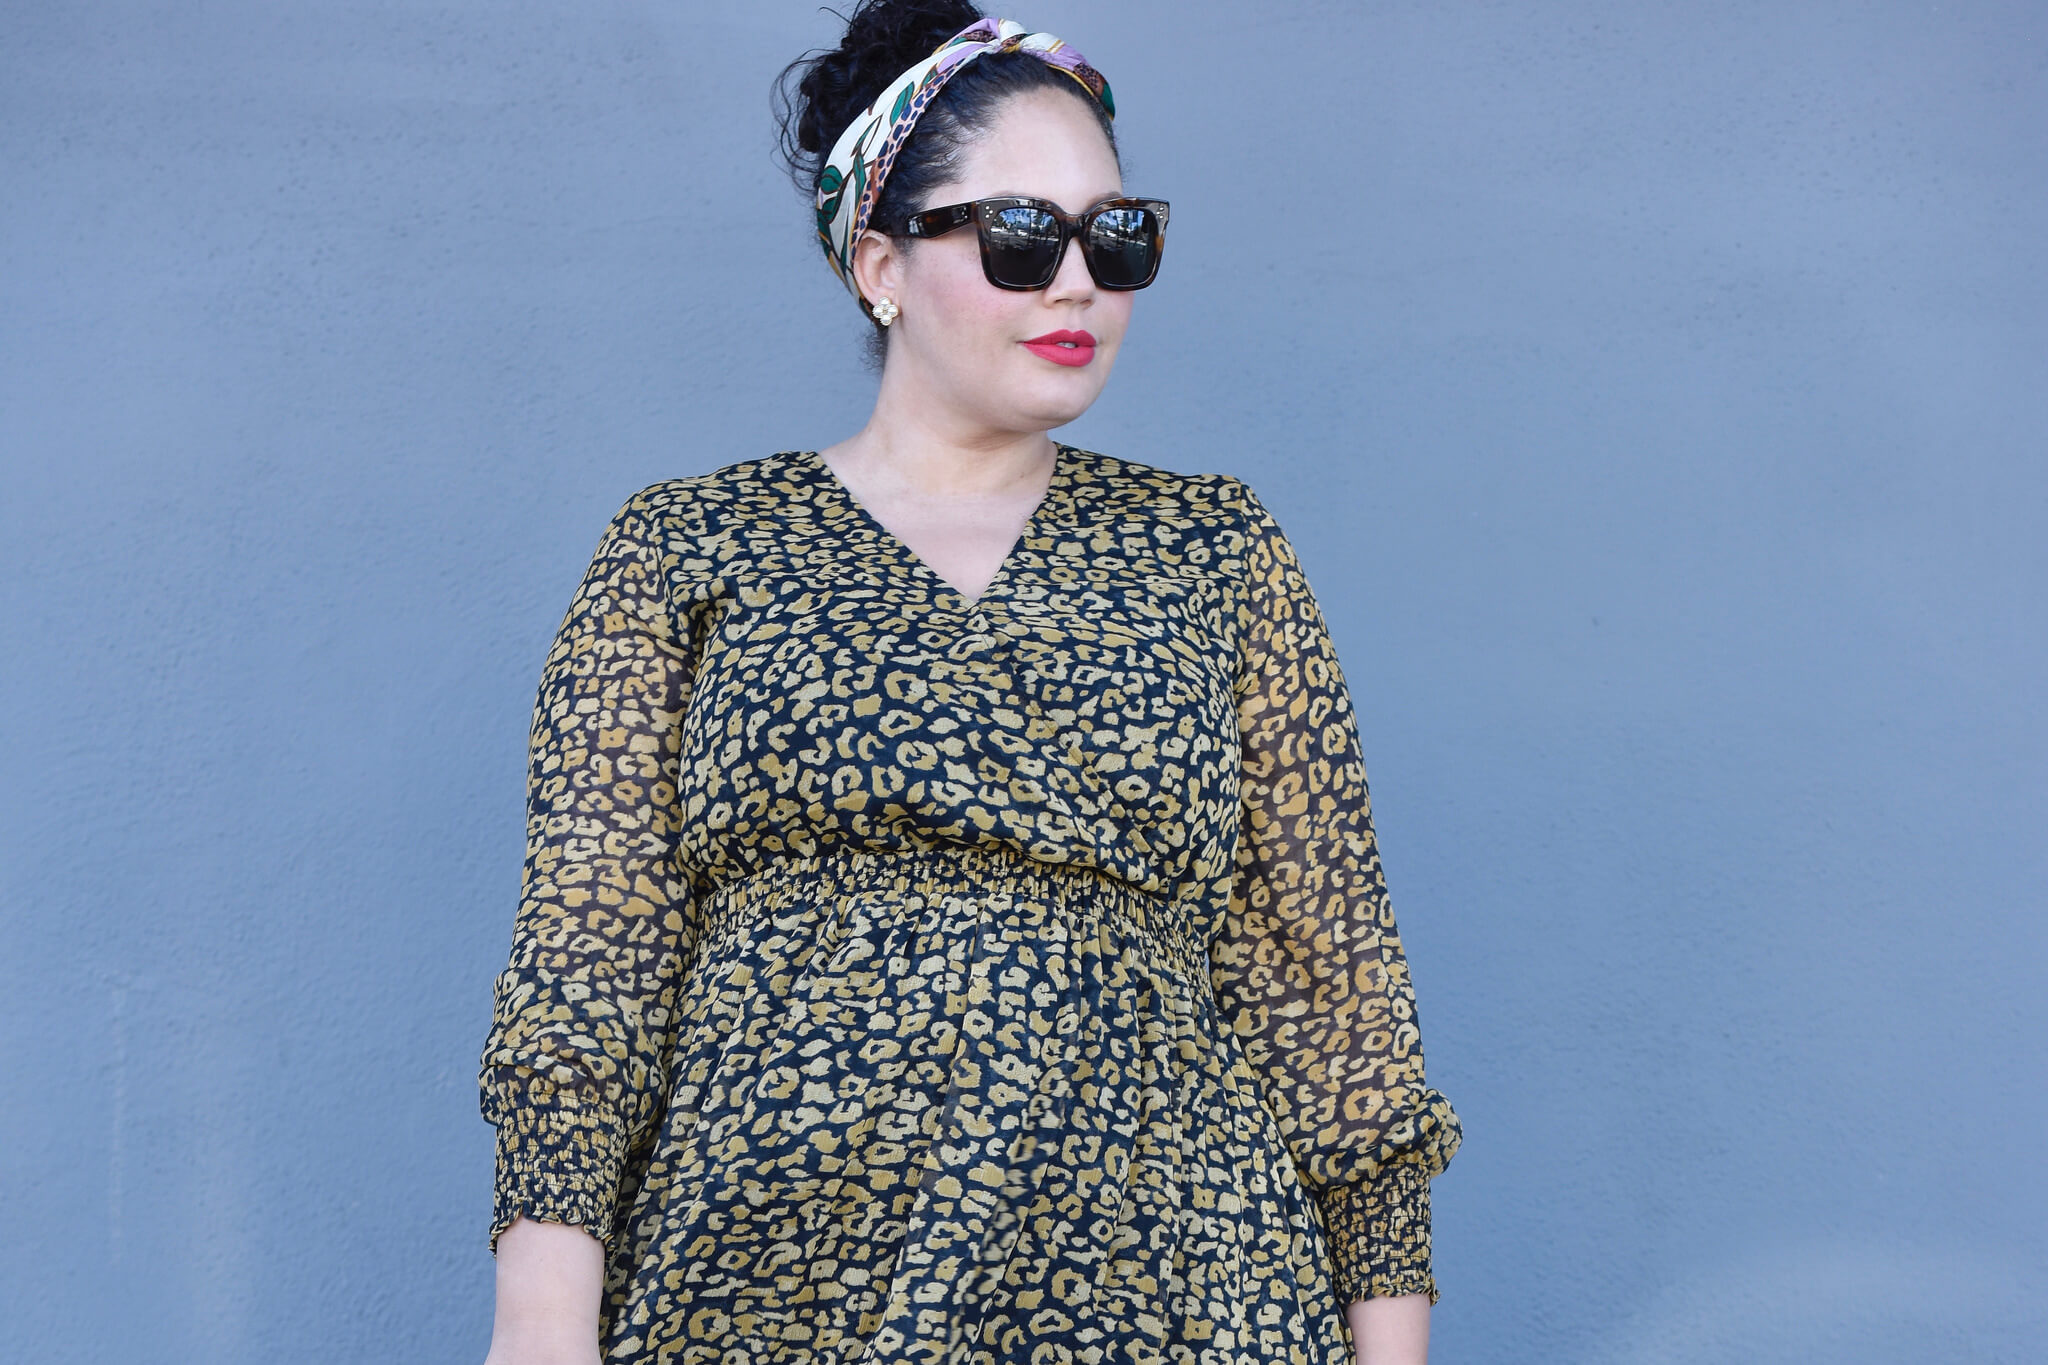 Best Budget-Friendly Shopping for all Sizes via @GirlWithCurves